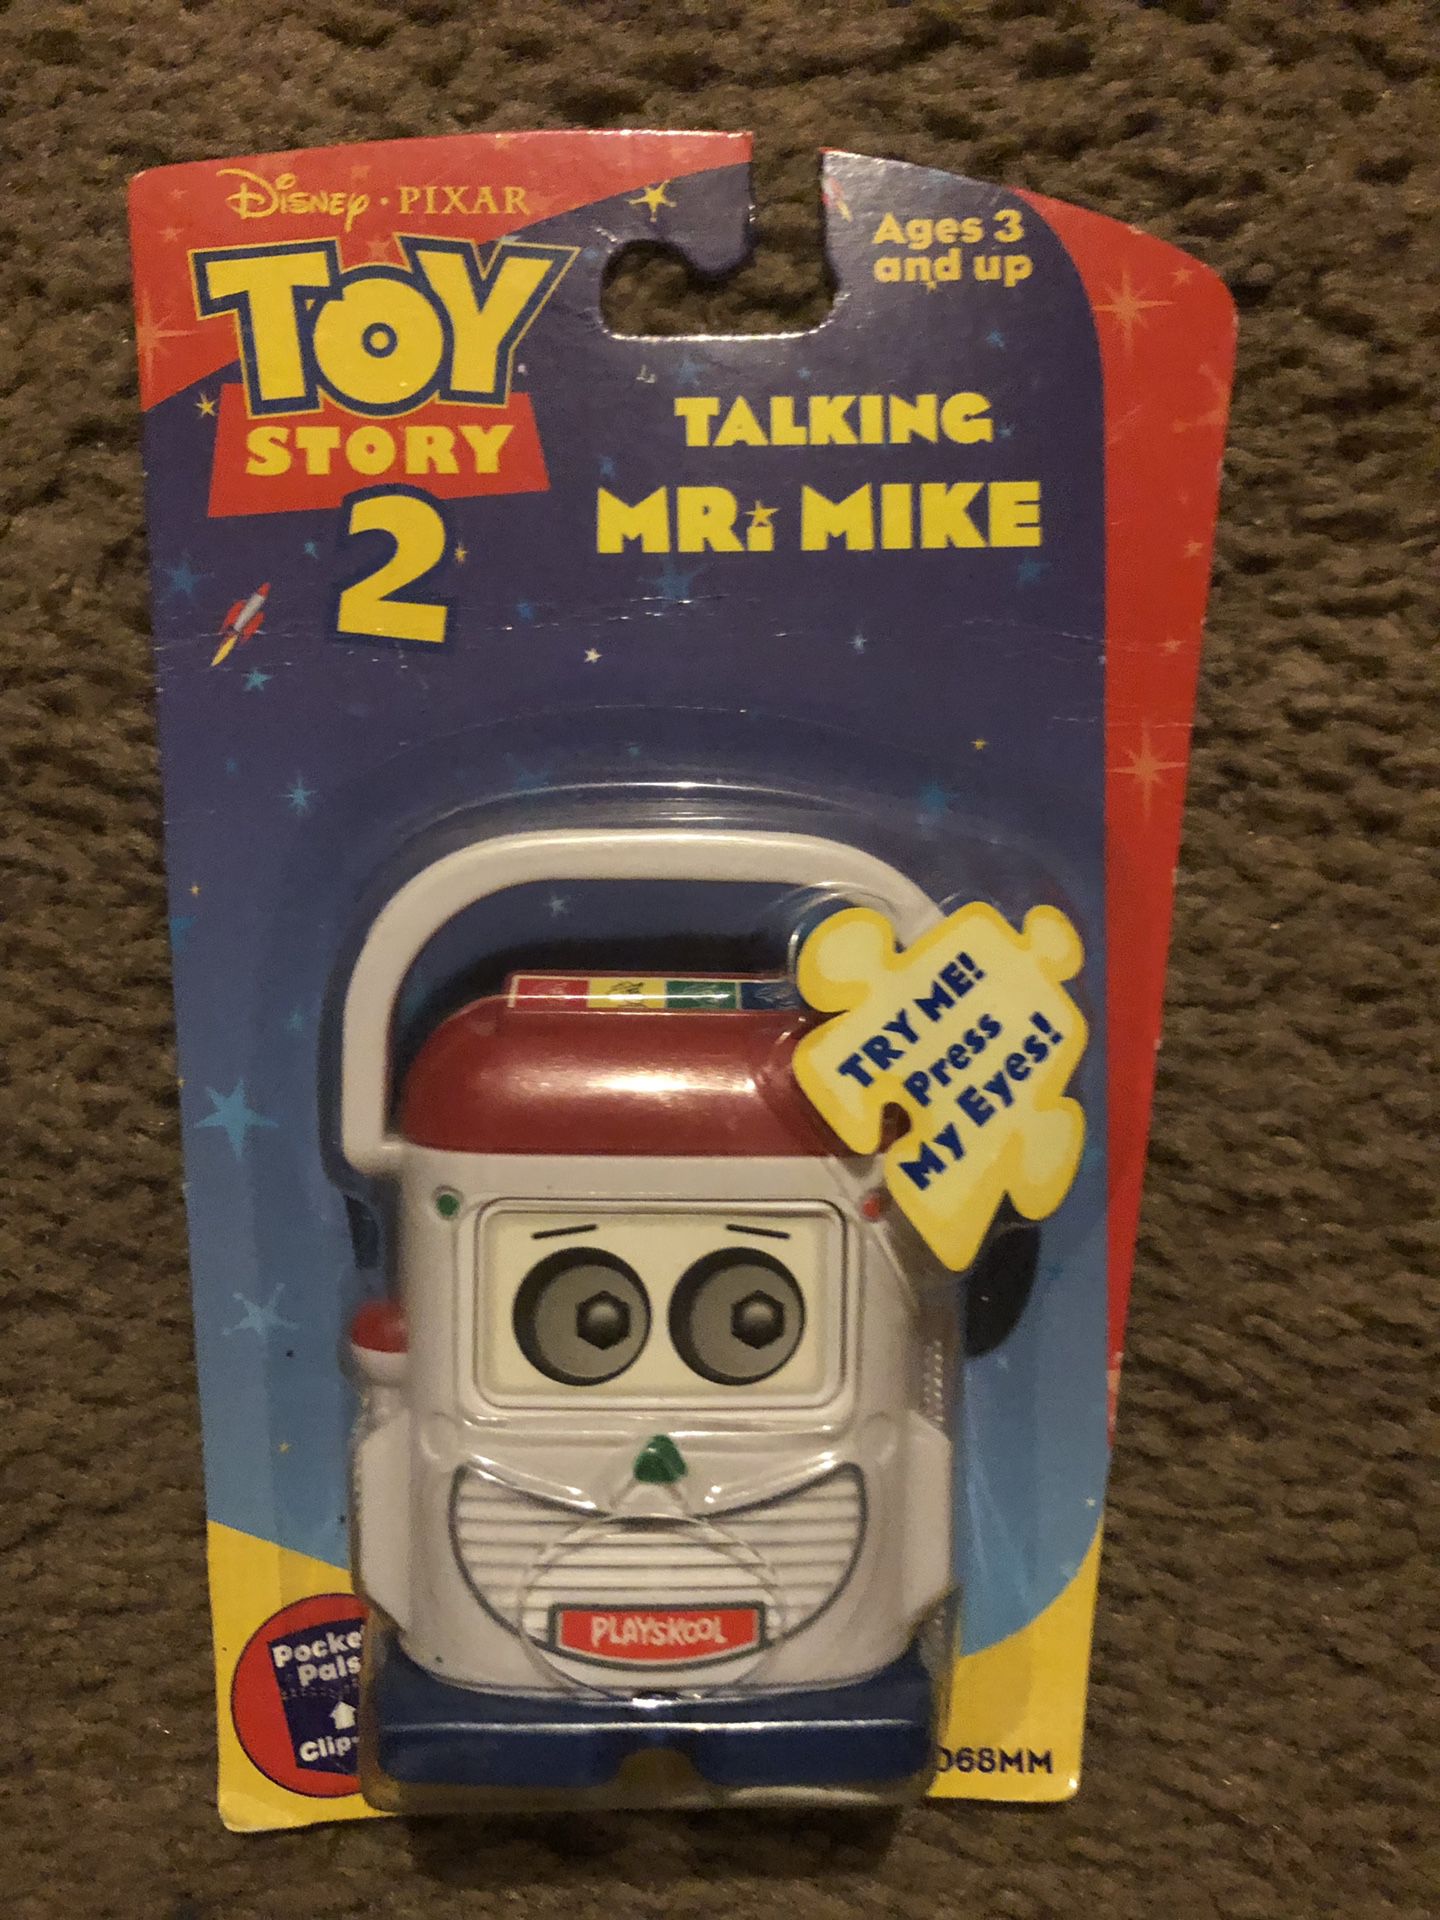 Toy story 2 mr mike